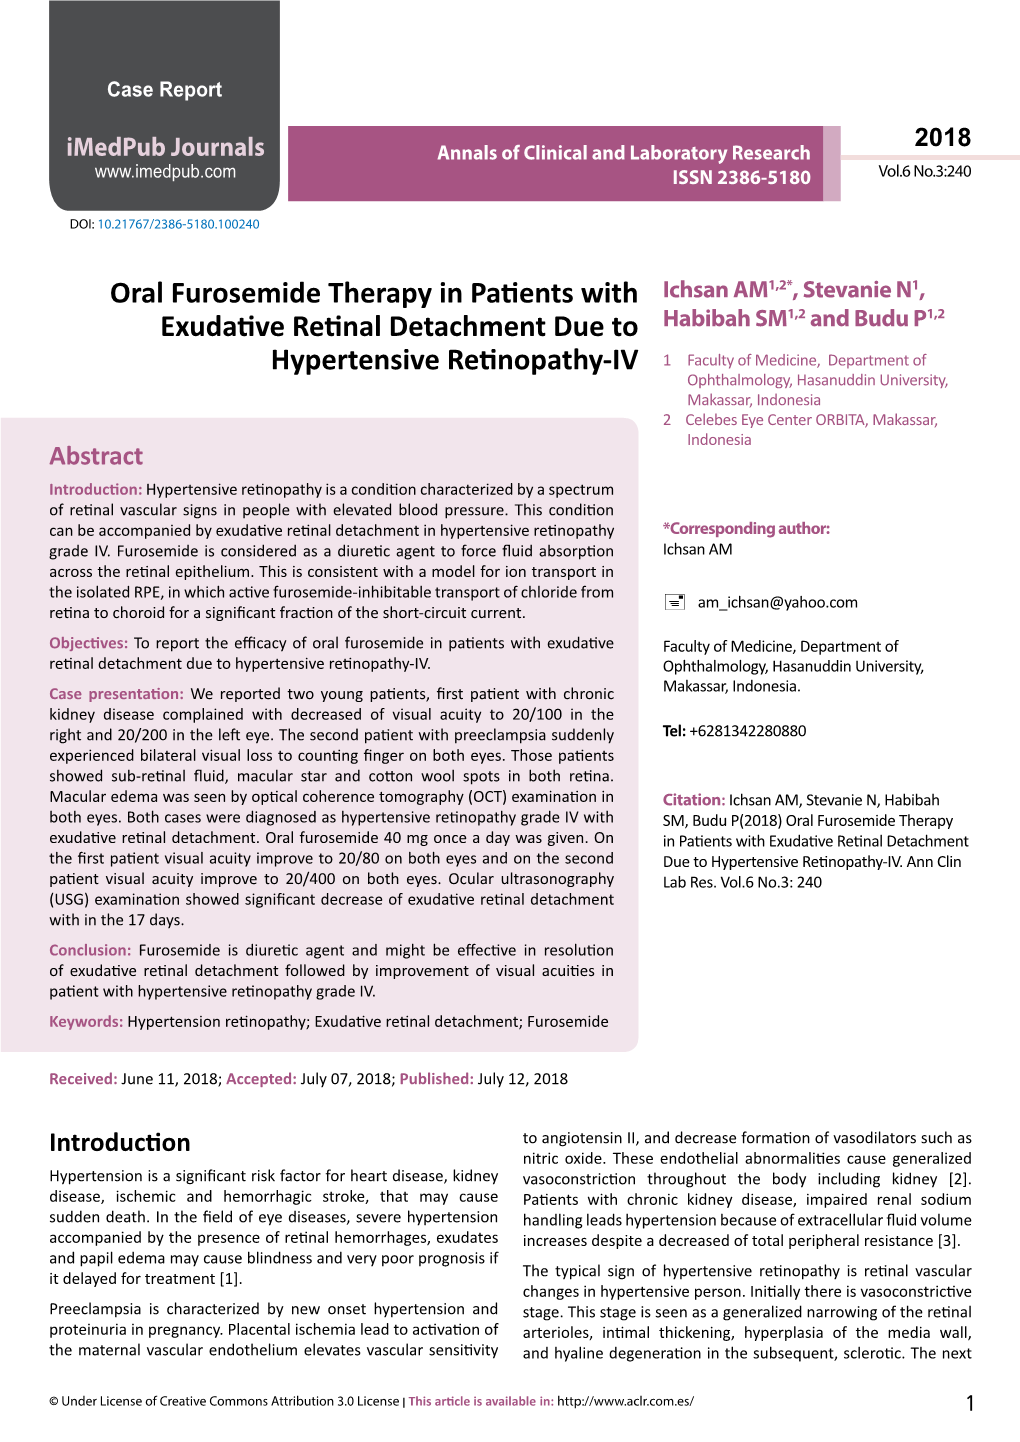 Oral Furosemide Therapy in Patients with Exudative Retinal Detachment